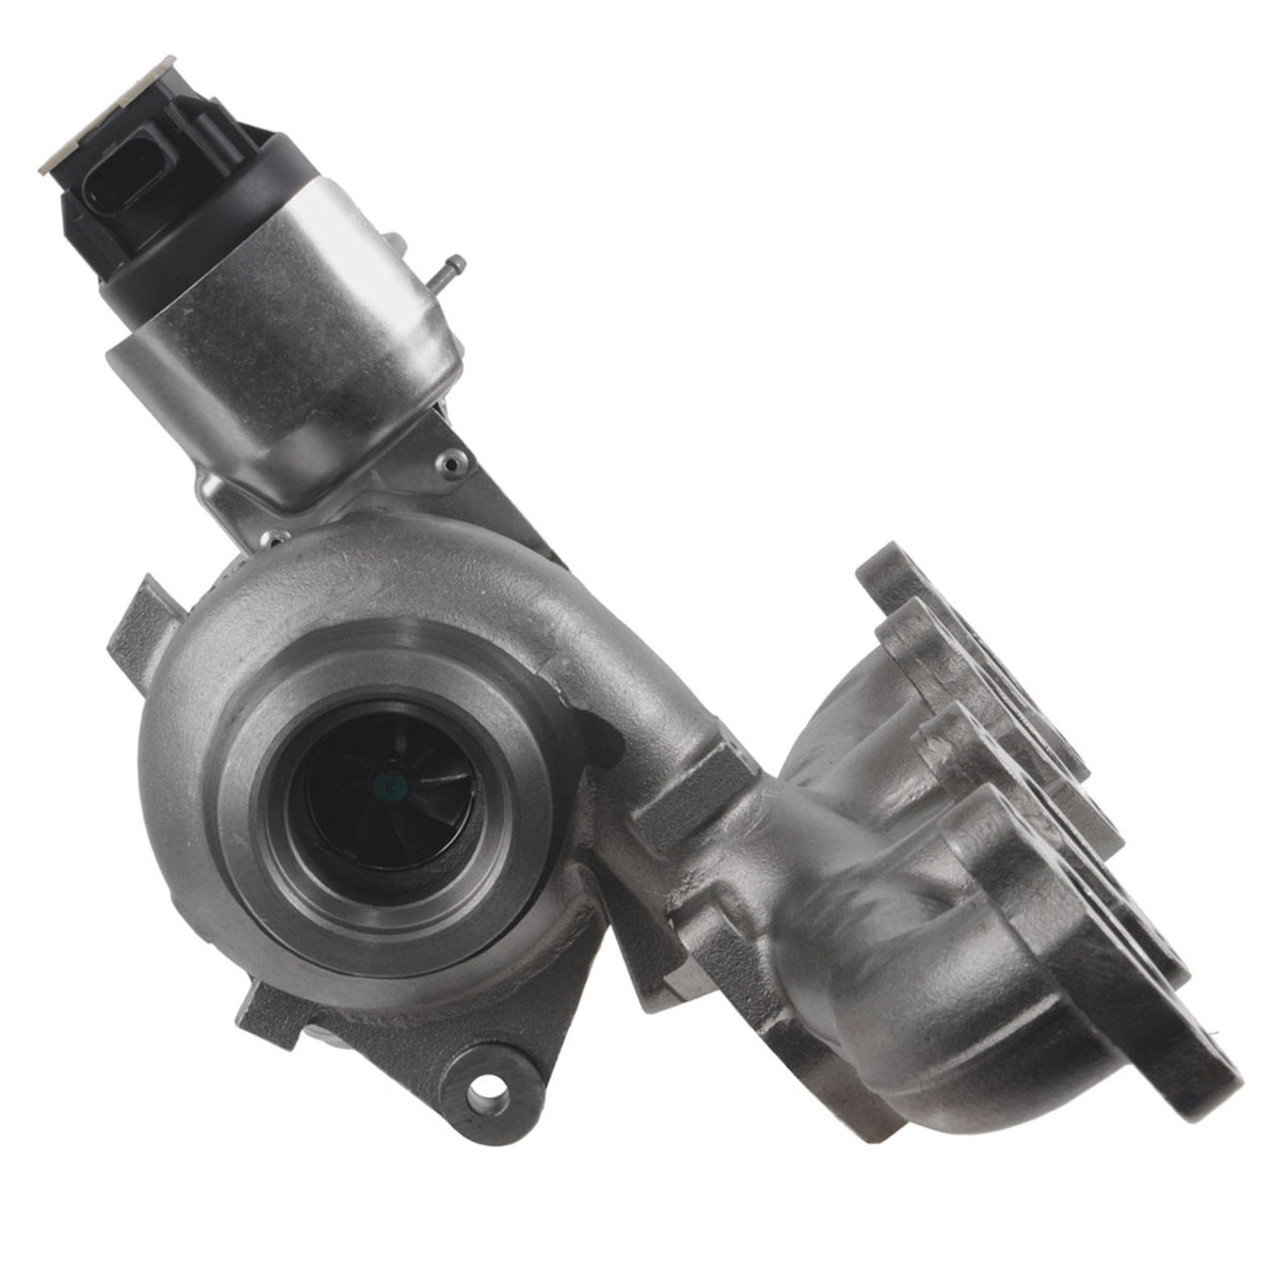 New Turbochargers Direct BV39 Replacement Turbo For 2005 2006 VW Jetta 1.9L  TDI BRM TUR-